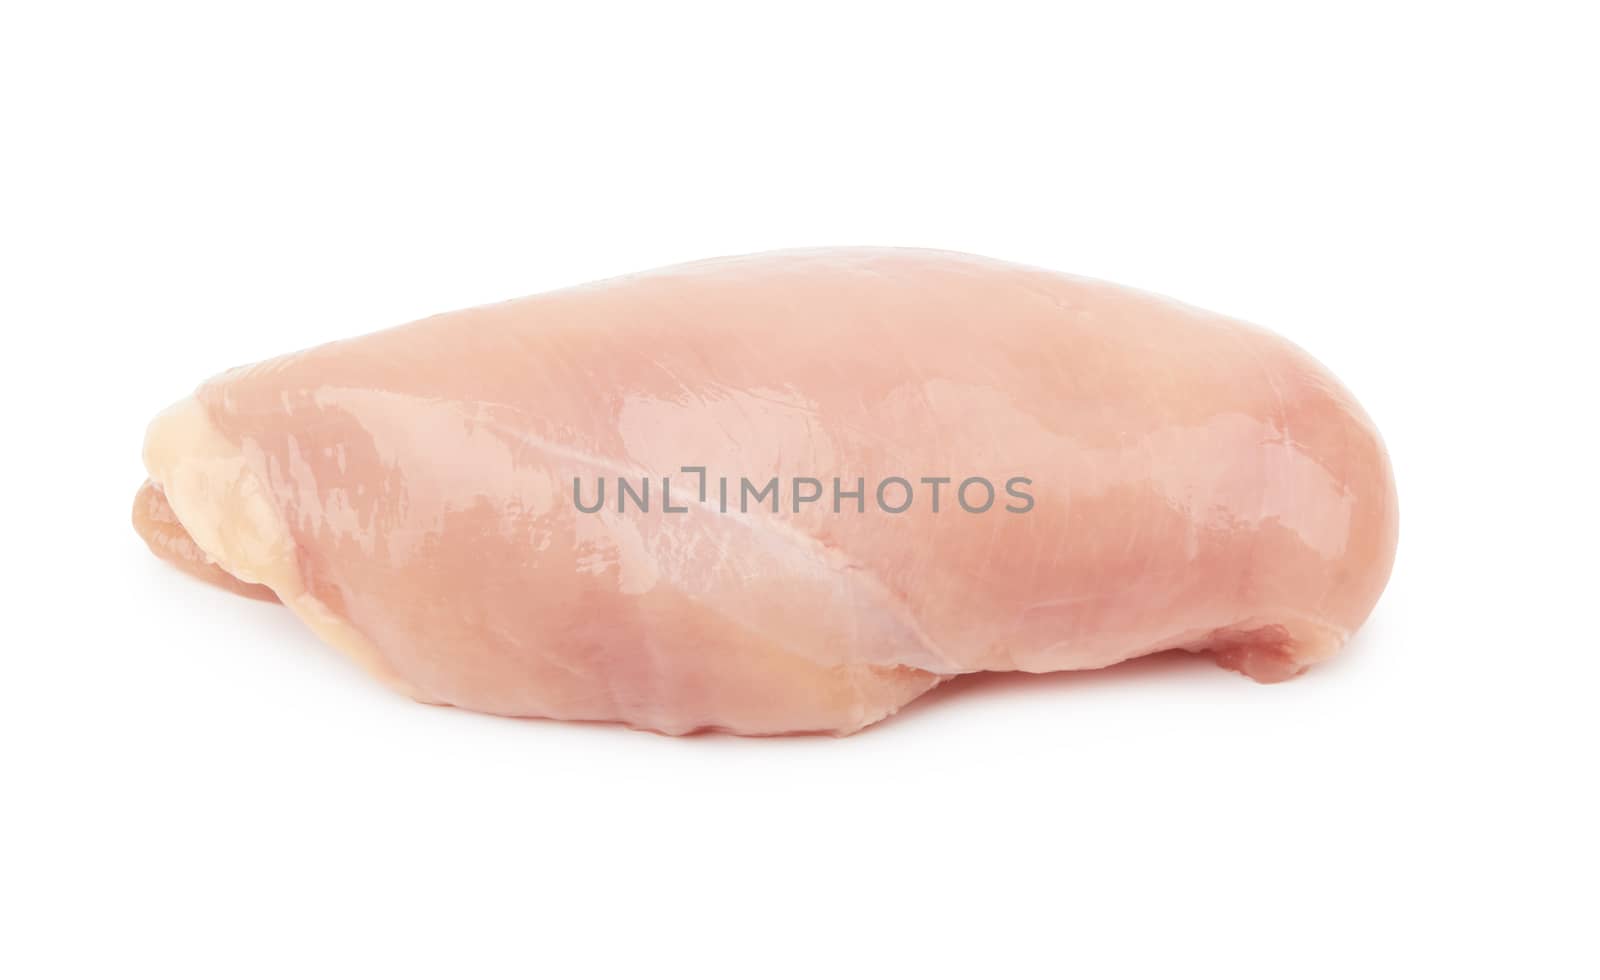 Raw chicken fillet isolated on white background